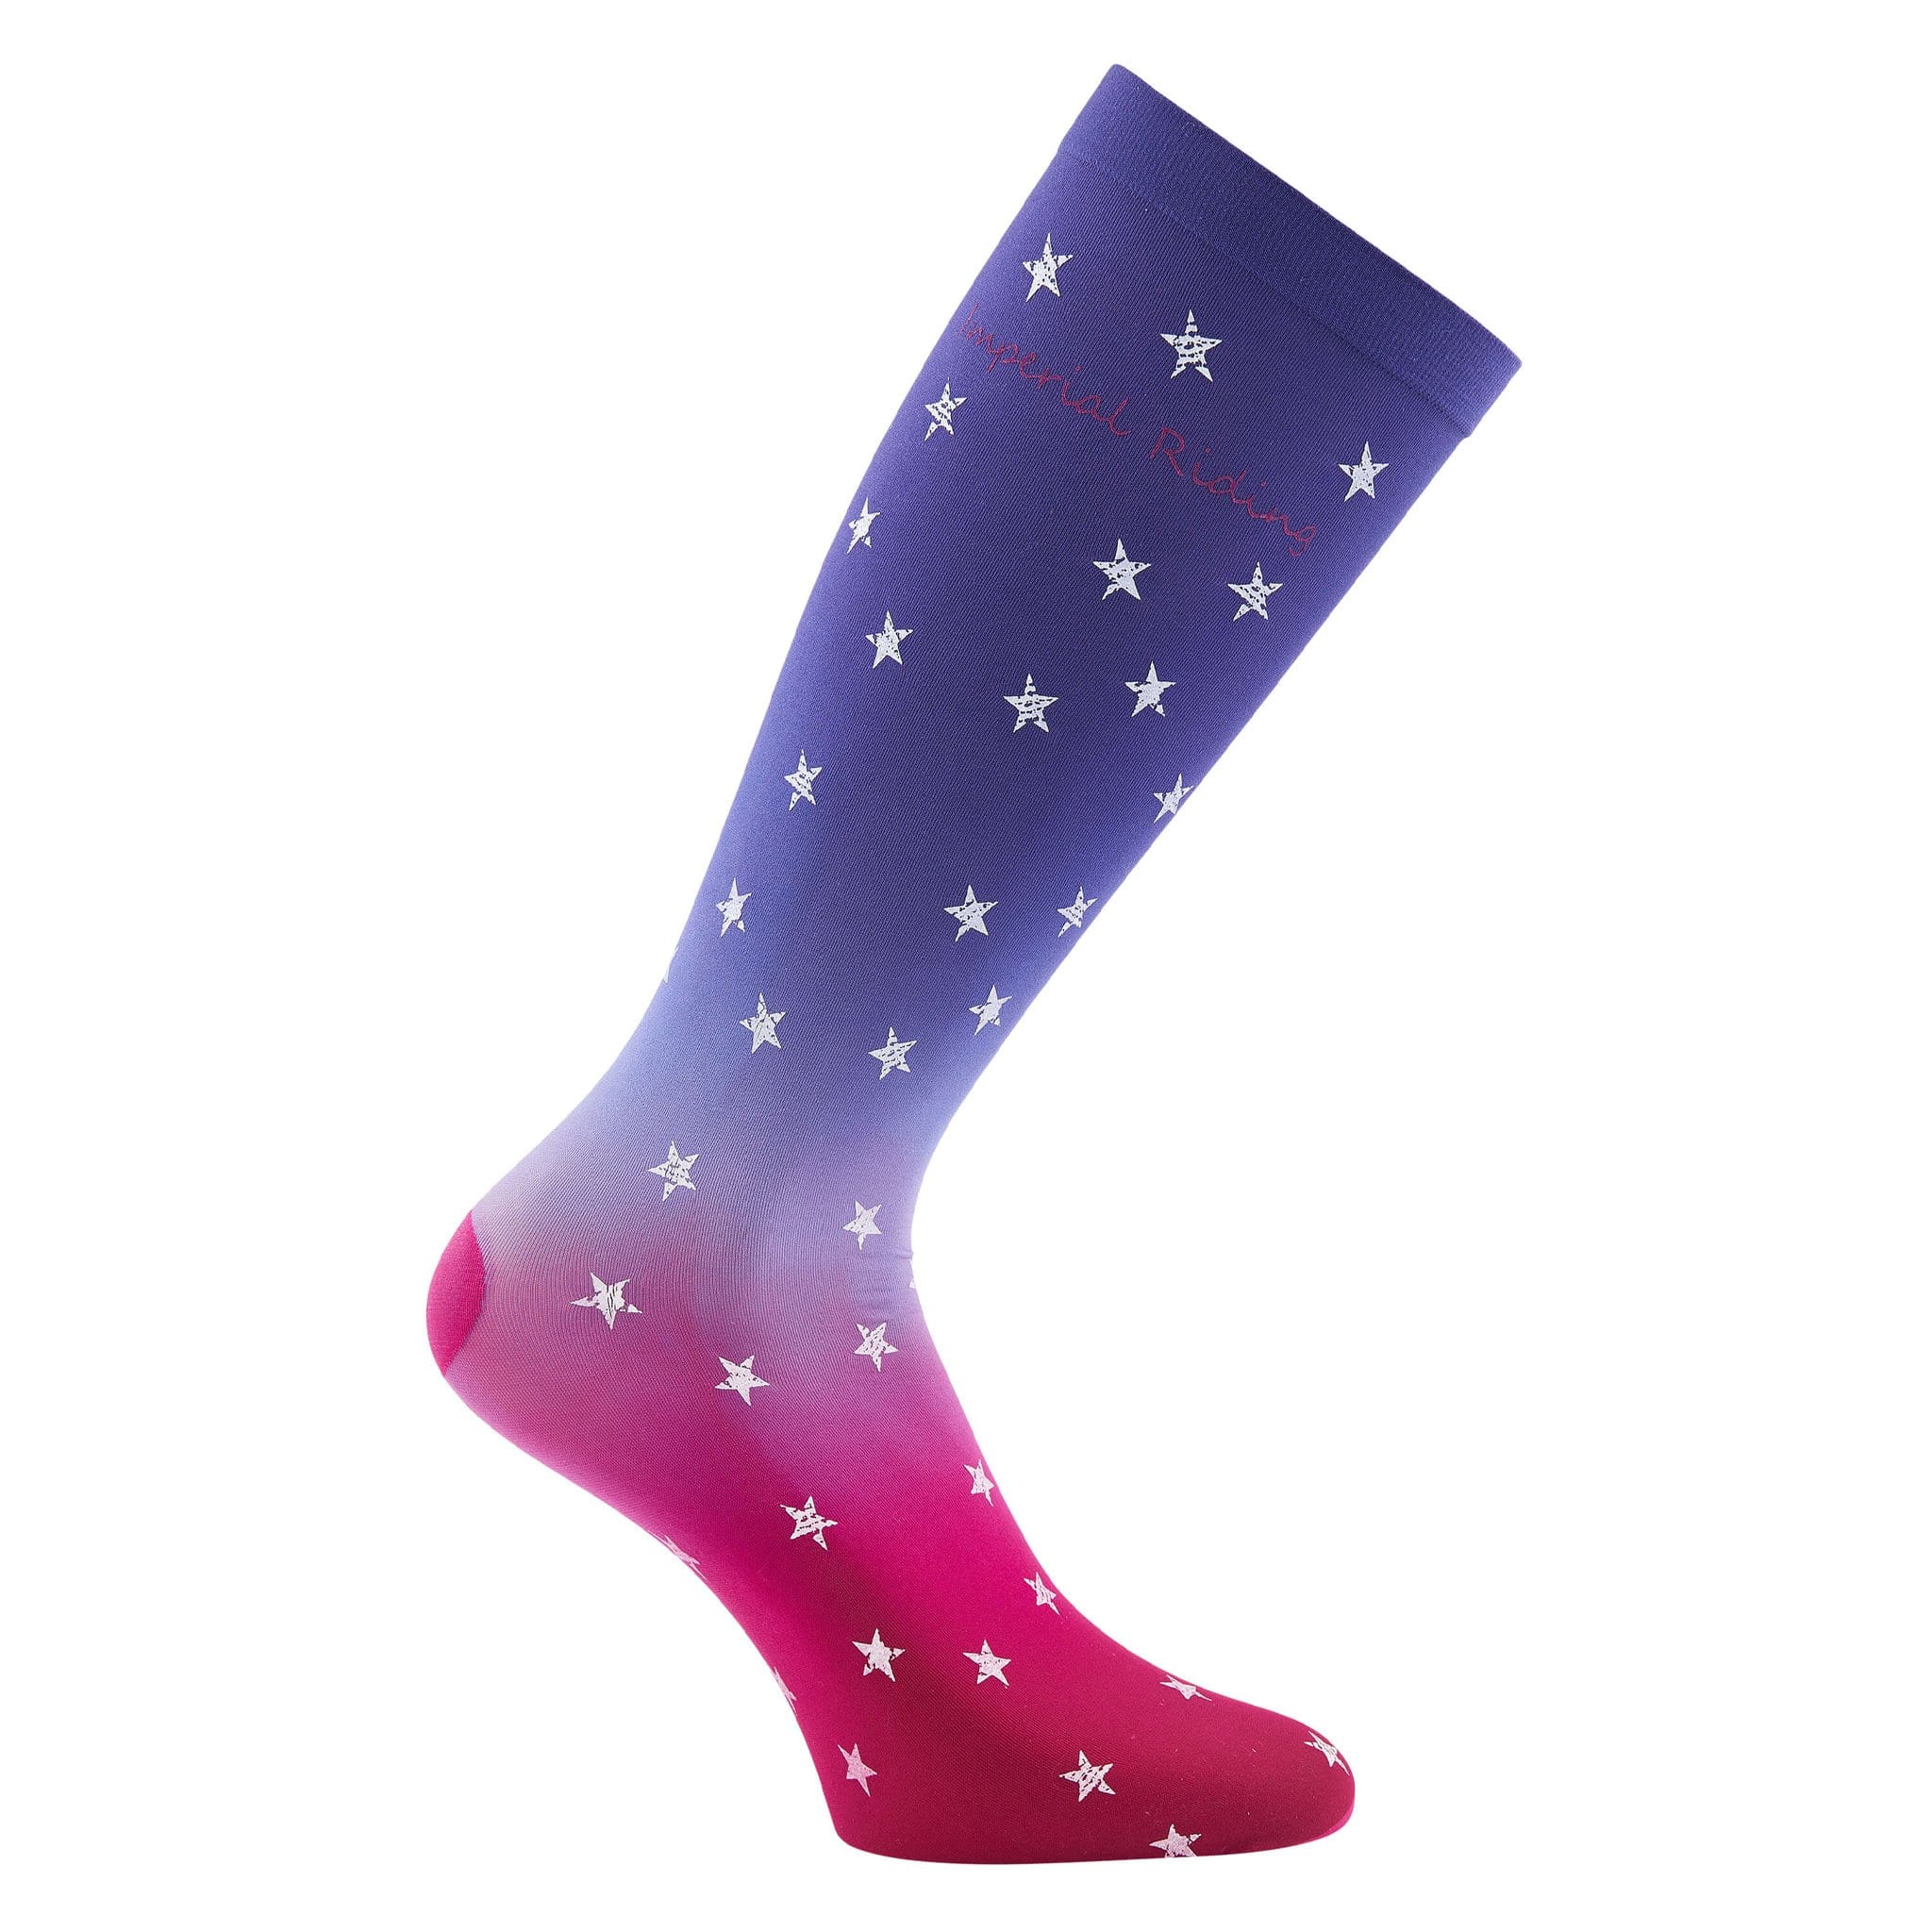 Imperial Riding Vanitas II Riding Socks KL95319000 in Blue Bird (Blue and Pink with White Stars)